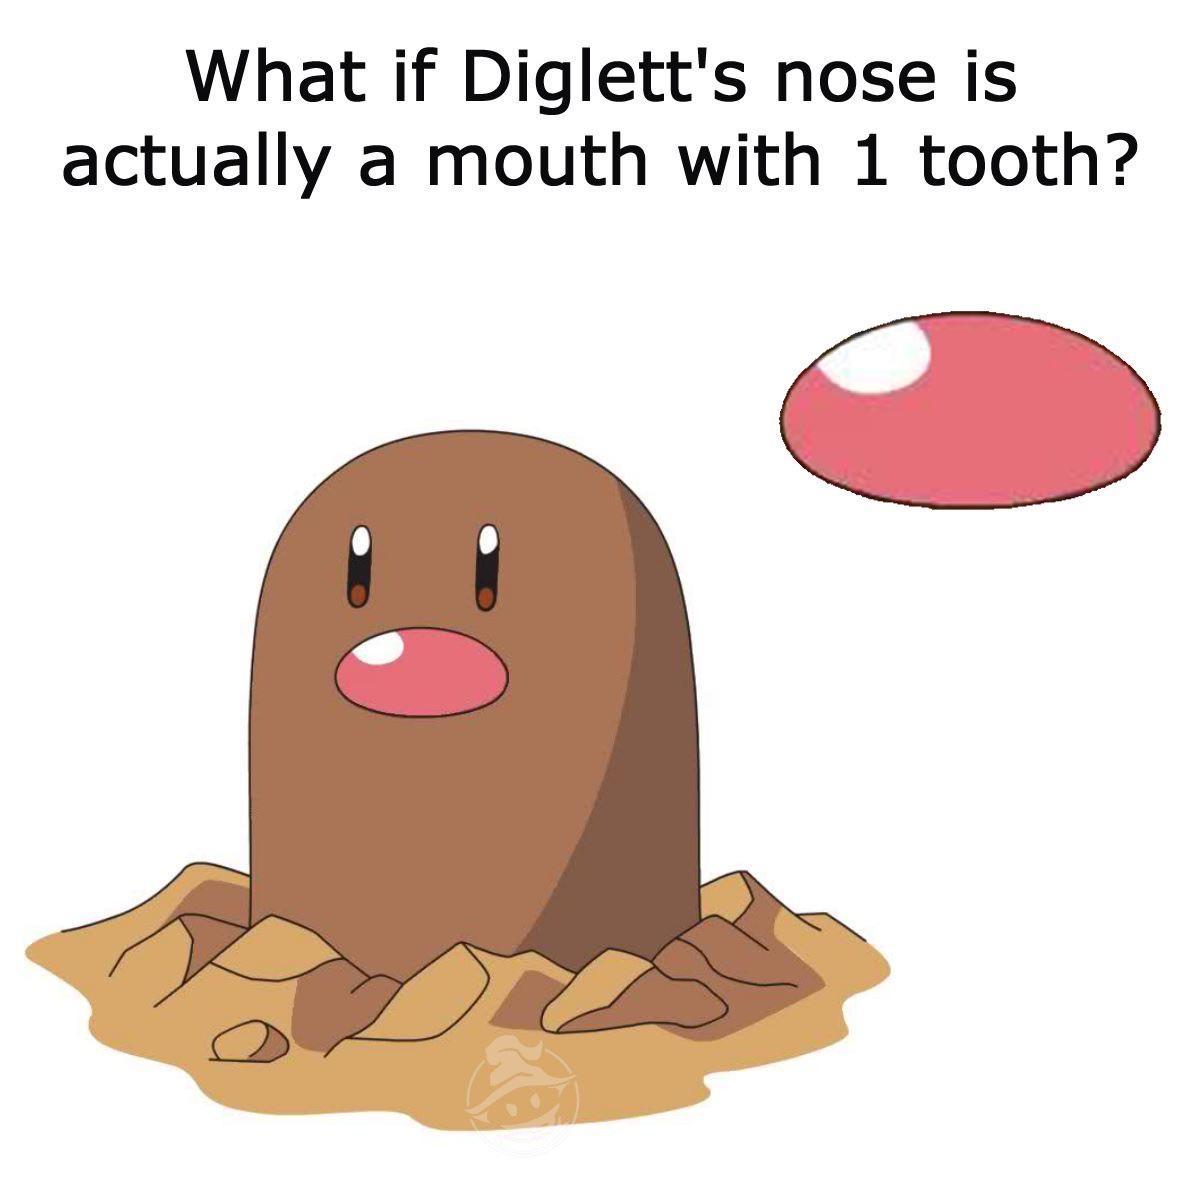 funny gaming memes - diglett's nose is a mouth - What if Diglett's nose is actually a mouth with 1 tooth?